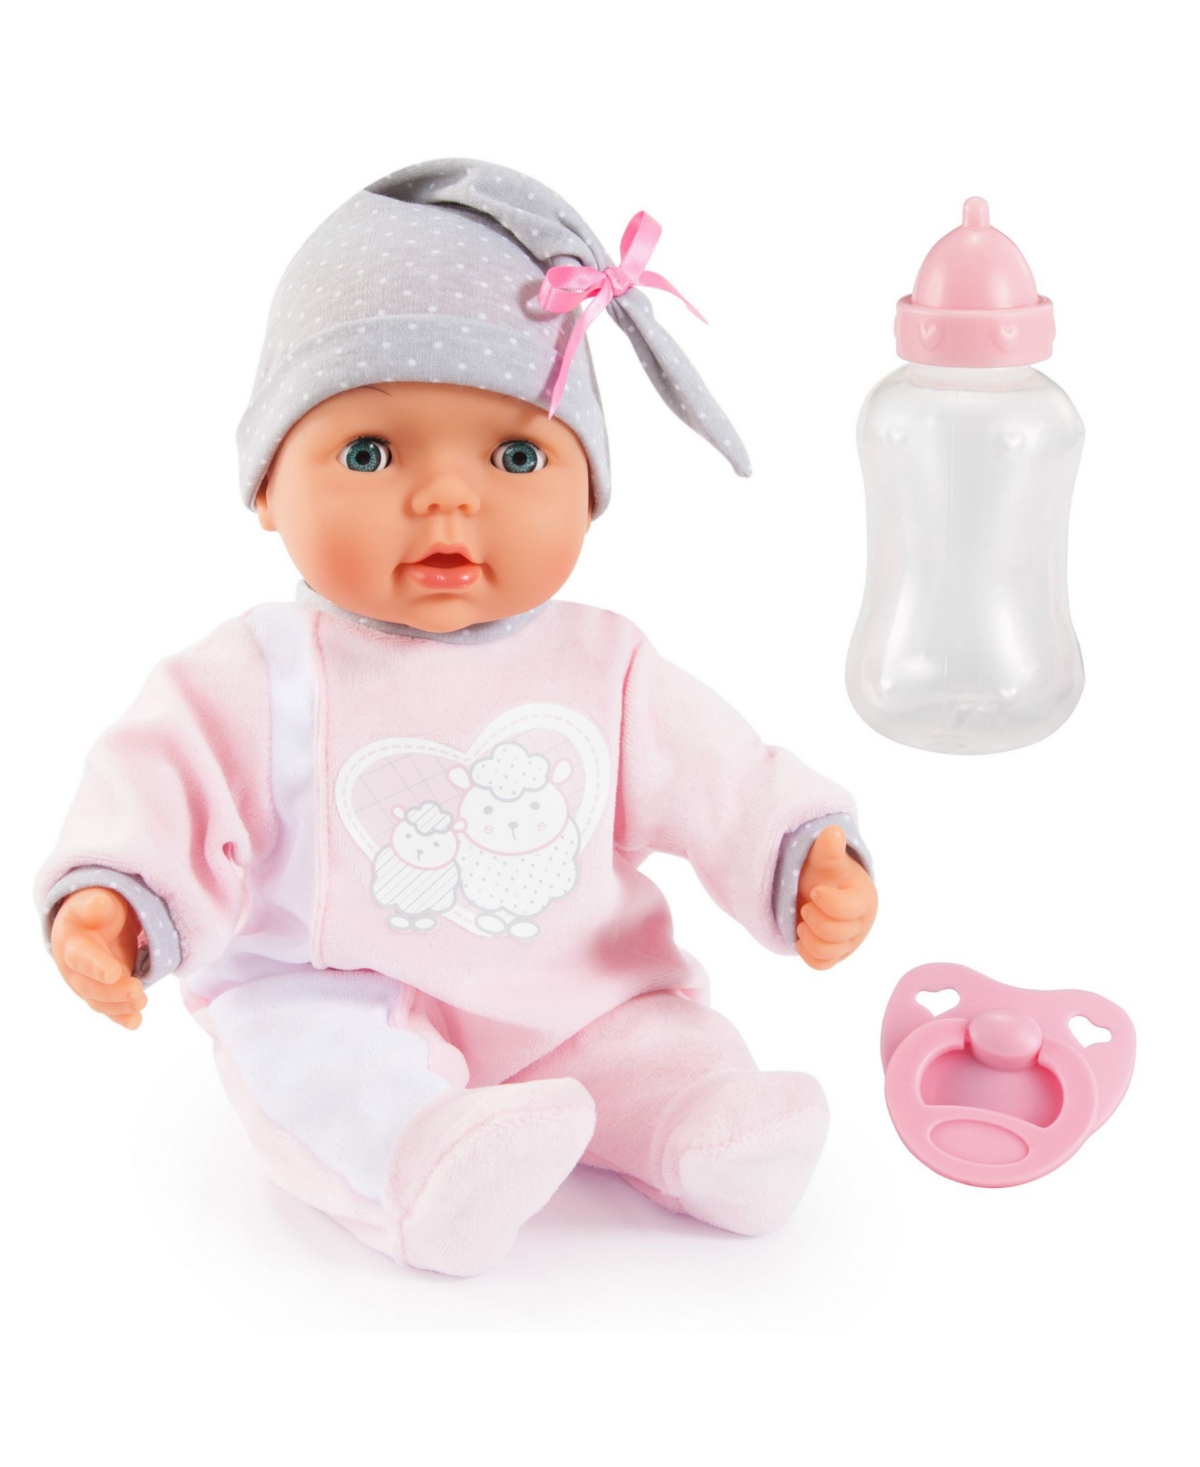 Redbox Kids' My Piccolina 15" Interactive Baby Doll In Multi